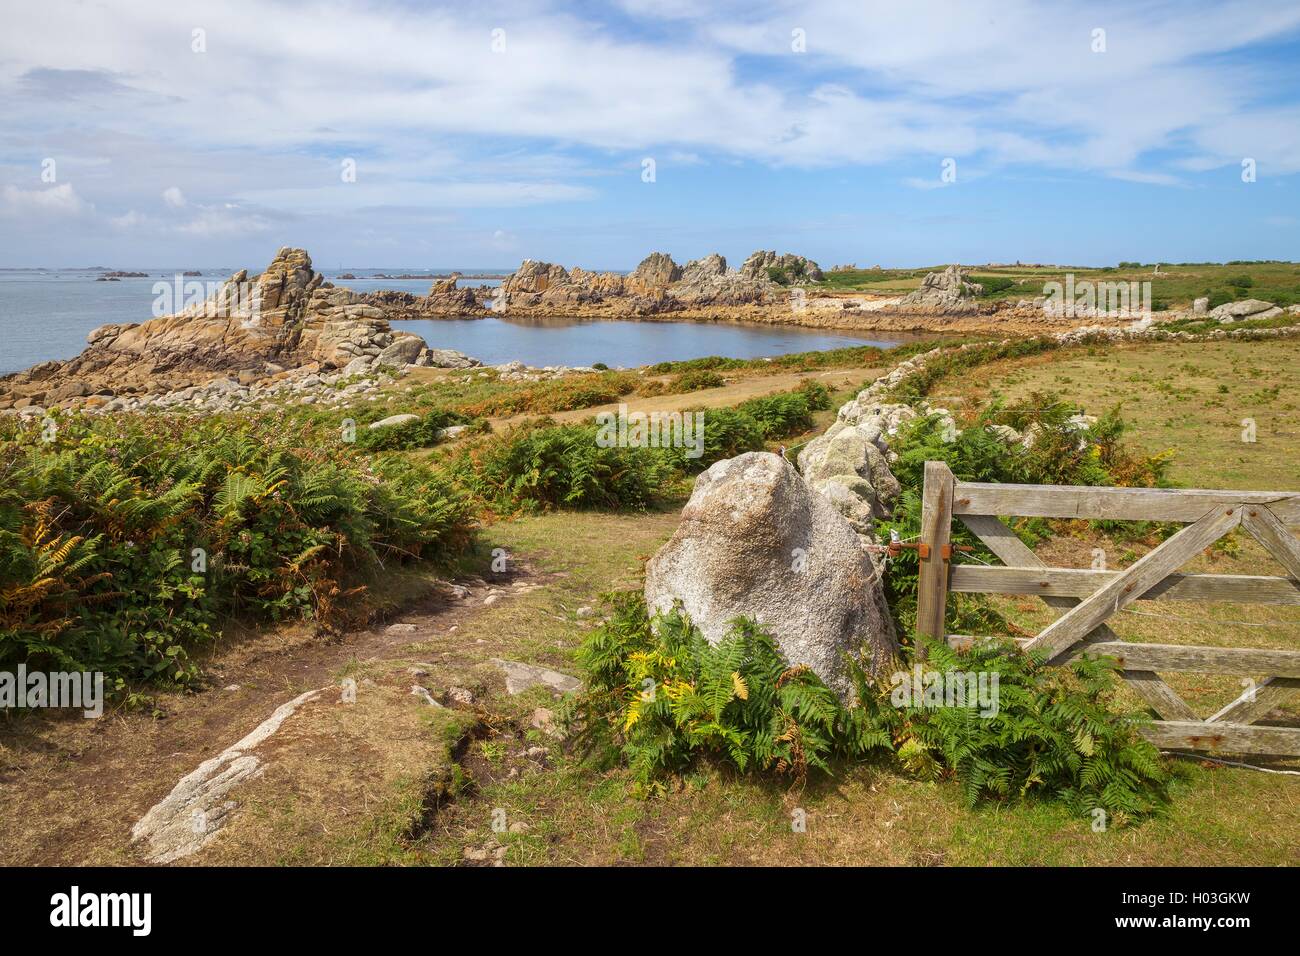 Periglis, St Agnes, Isles of Scilly, England Stock Photo